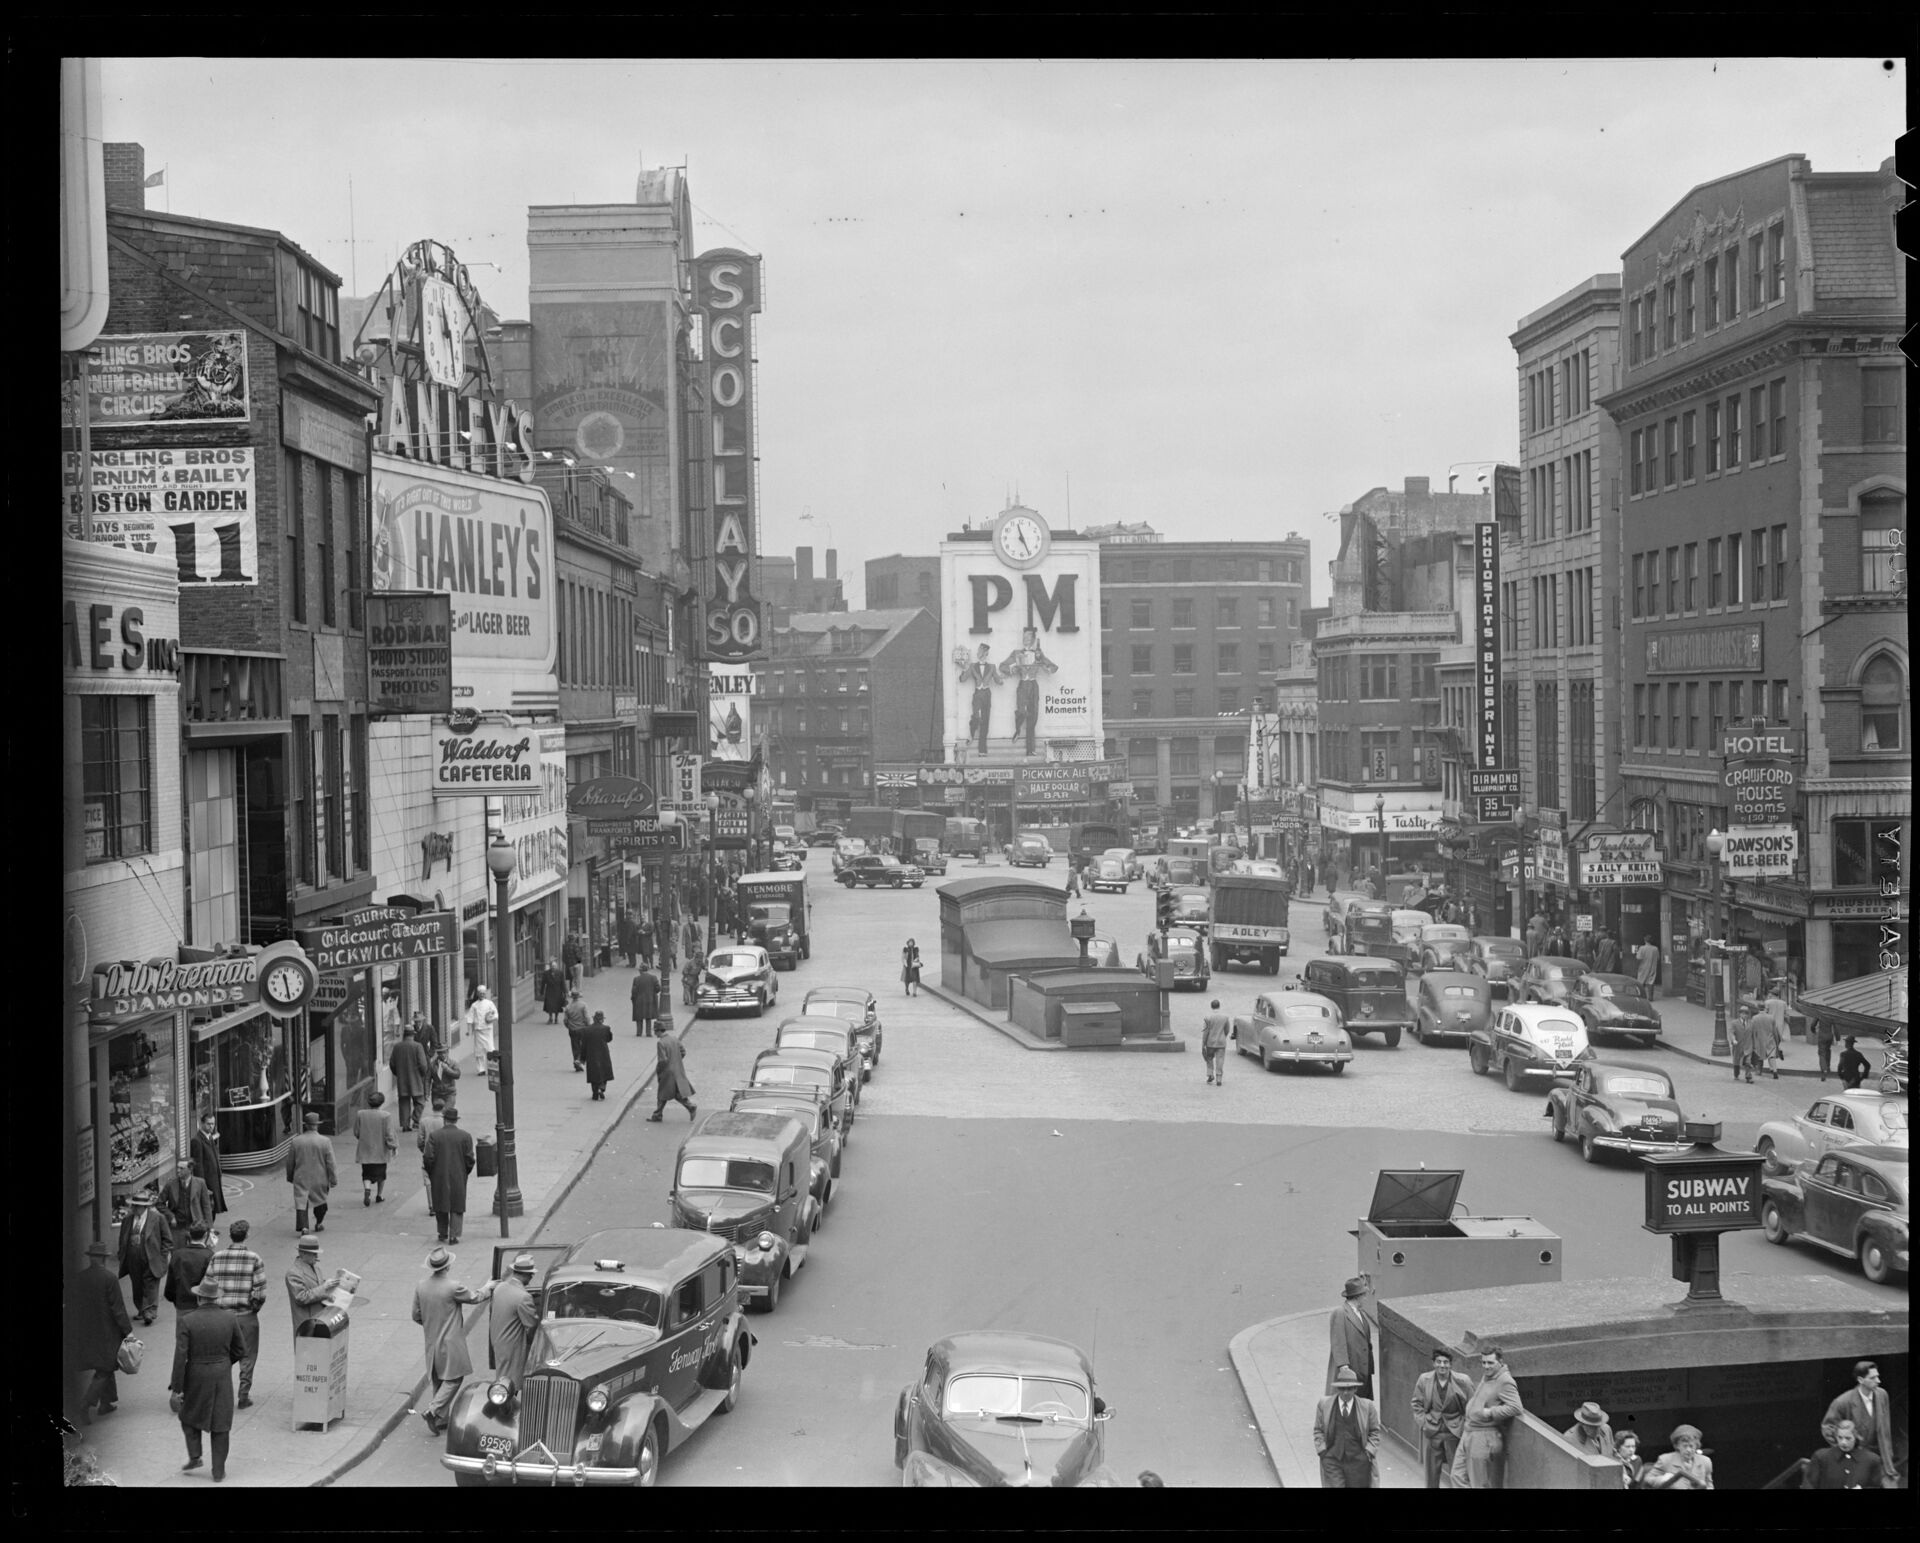 A crowded Scollay Square around 1942